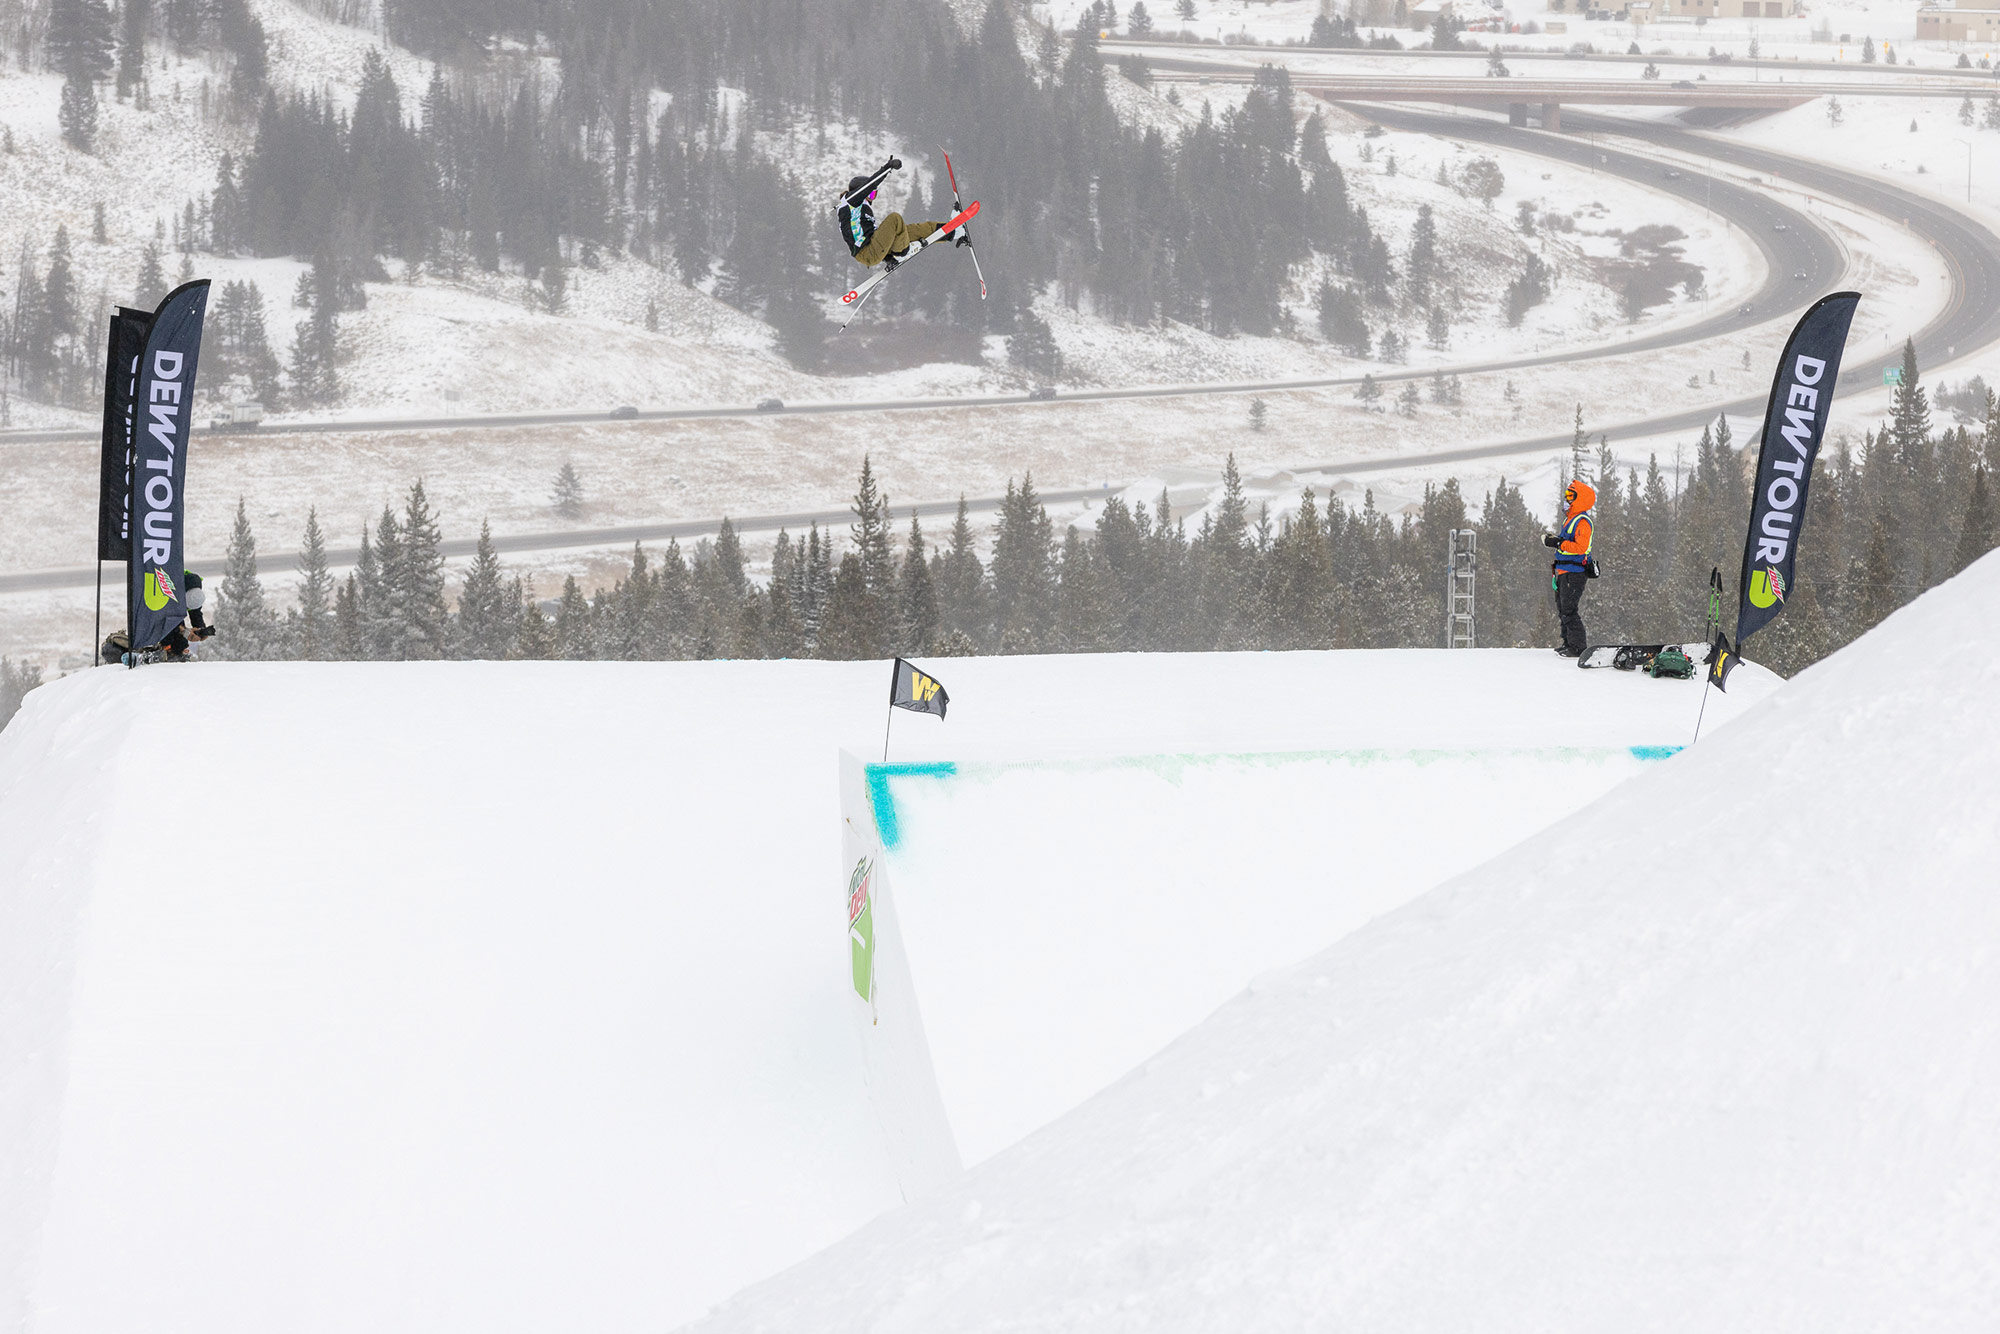 Marin Hamill competes in womens ski slopestyle finals at the 2021 Winter Dew Tour.